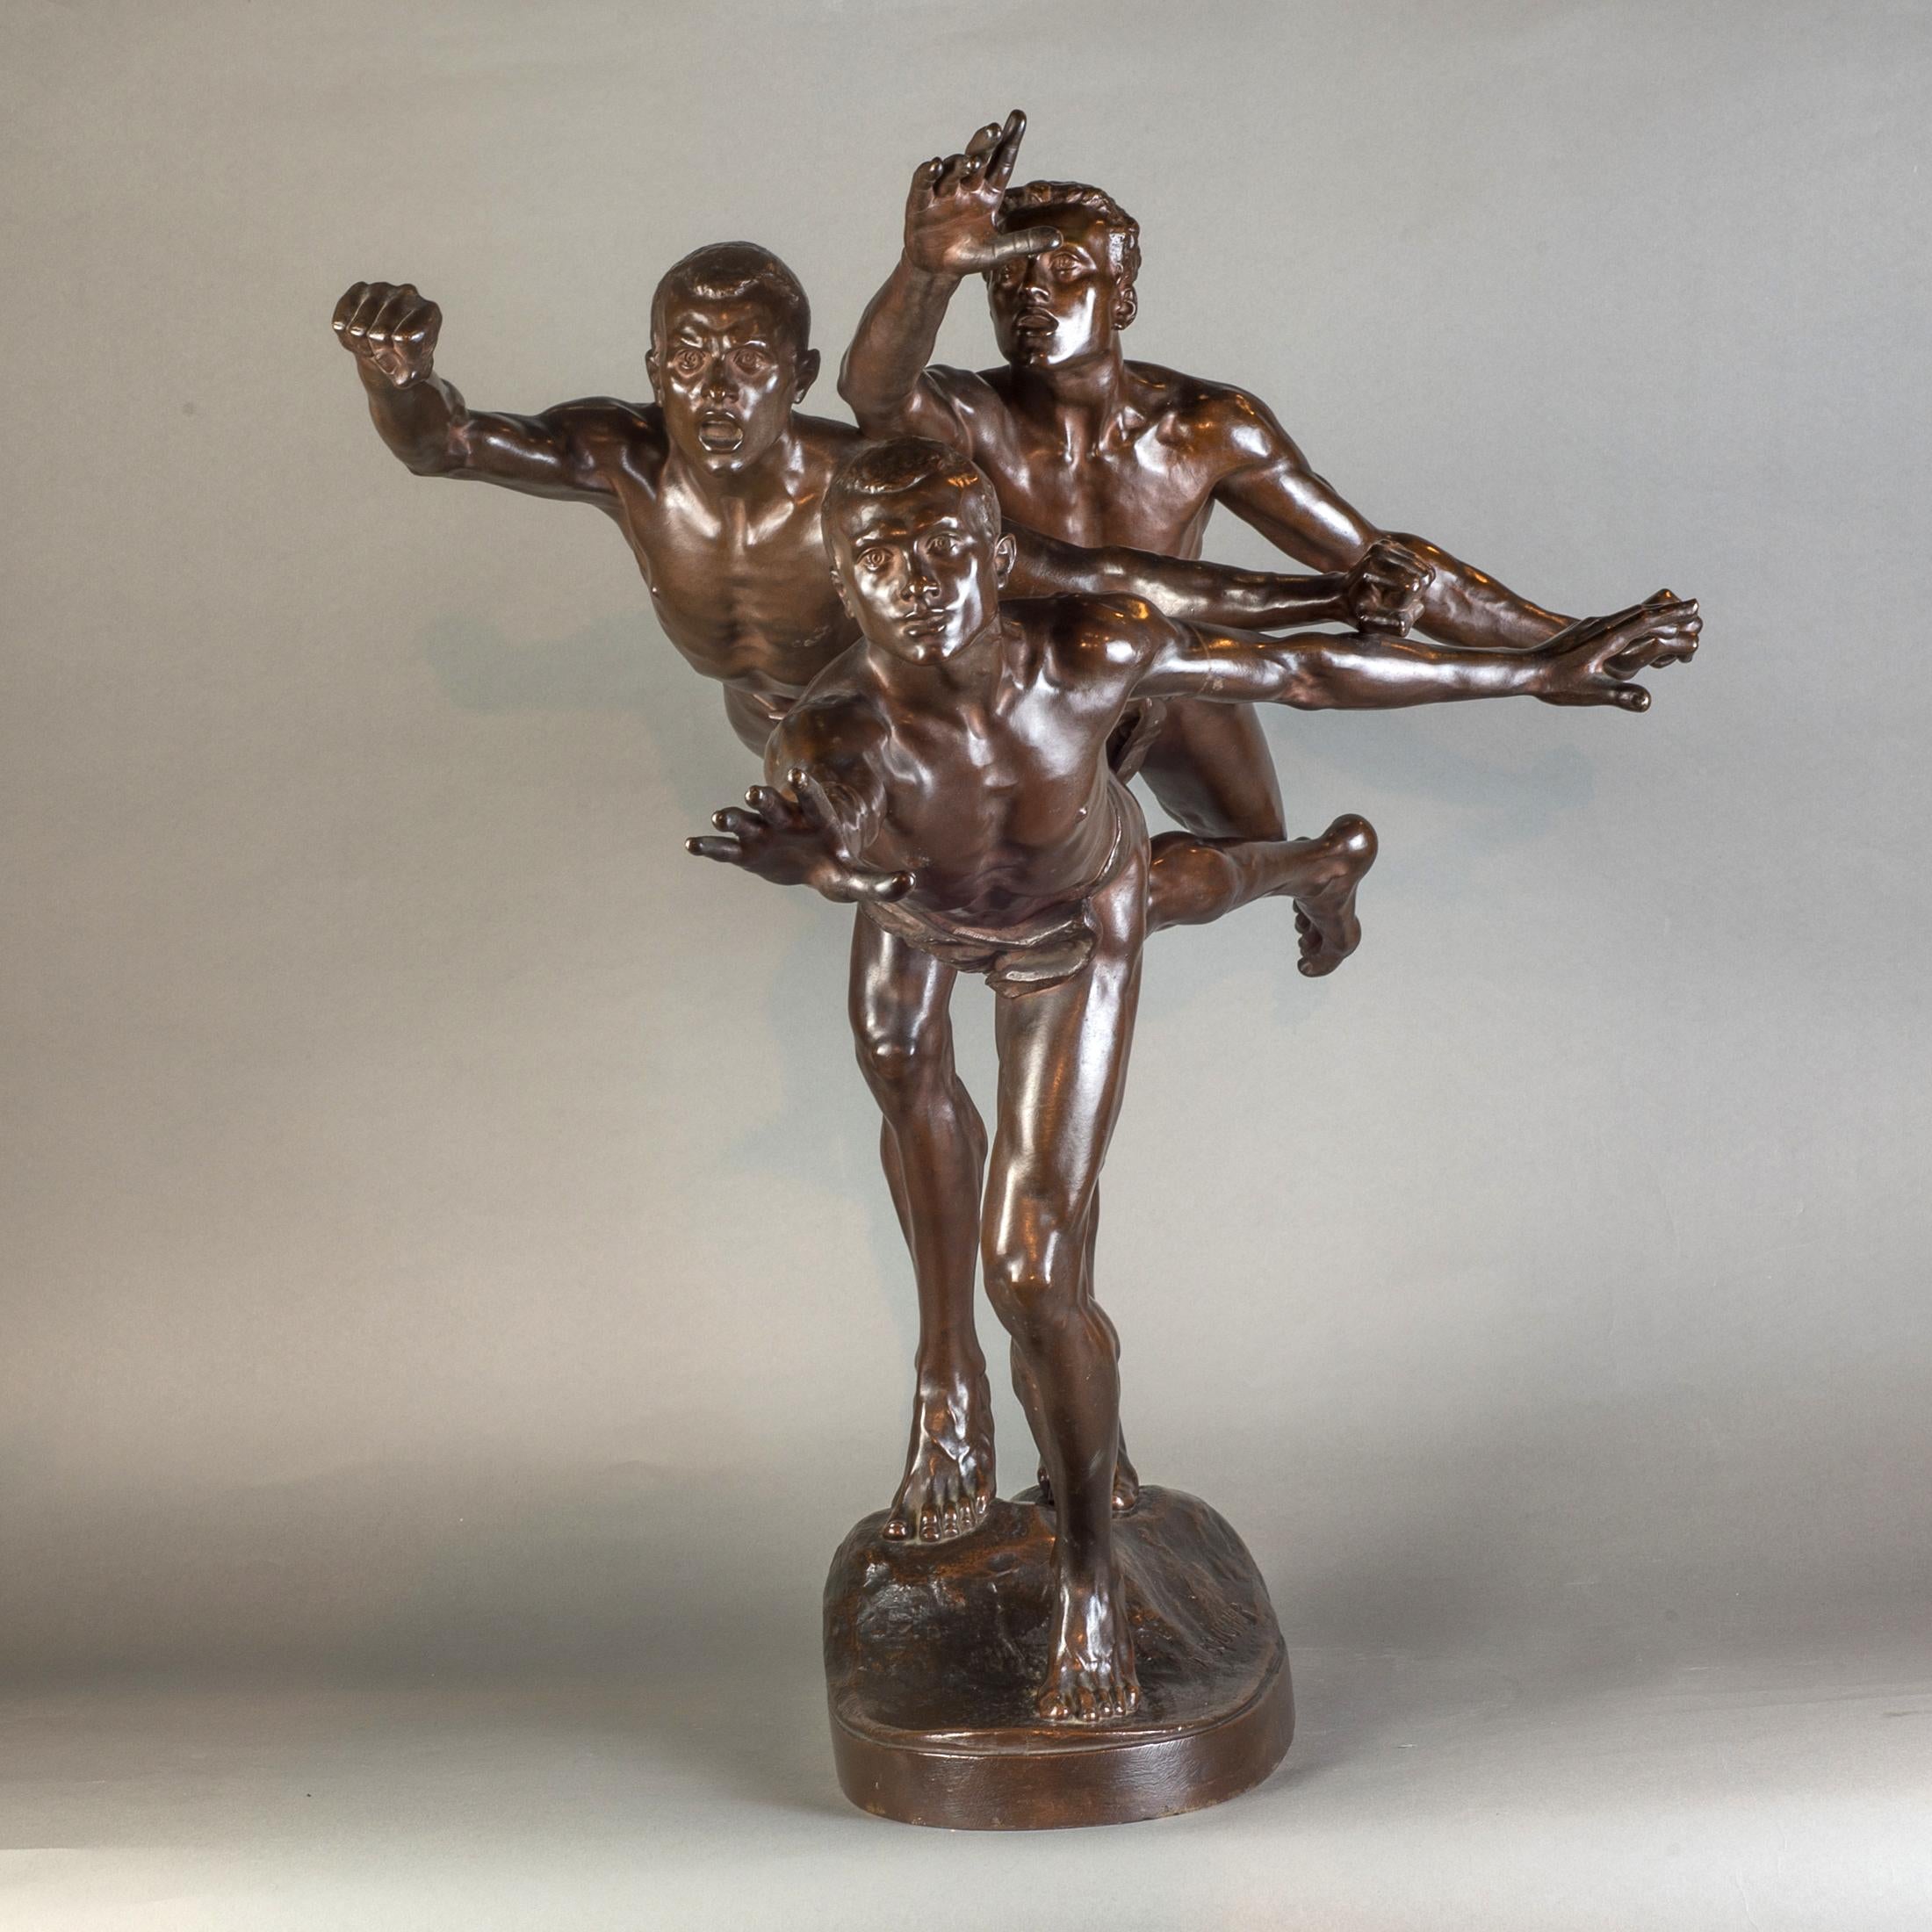 Large Patinated Bronze Group Sculpture Entitled 'Au But' - Gold Figurative Sculpture by F. Barbedienne Foundry